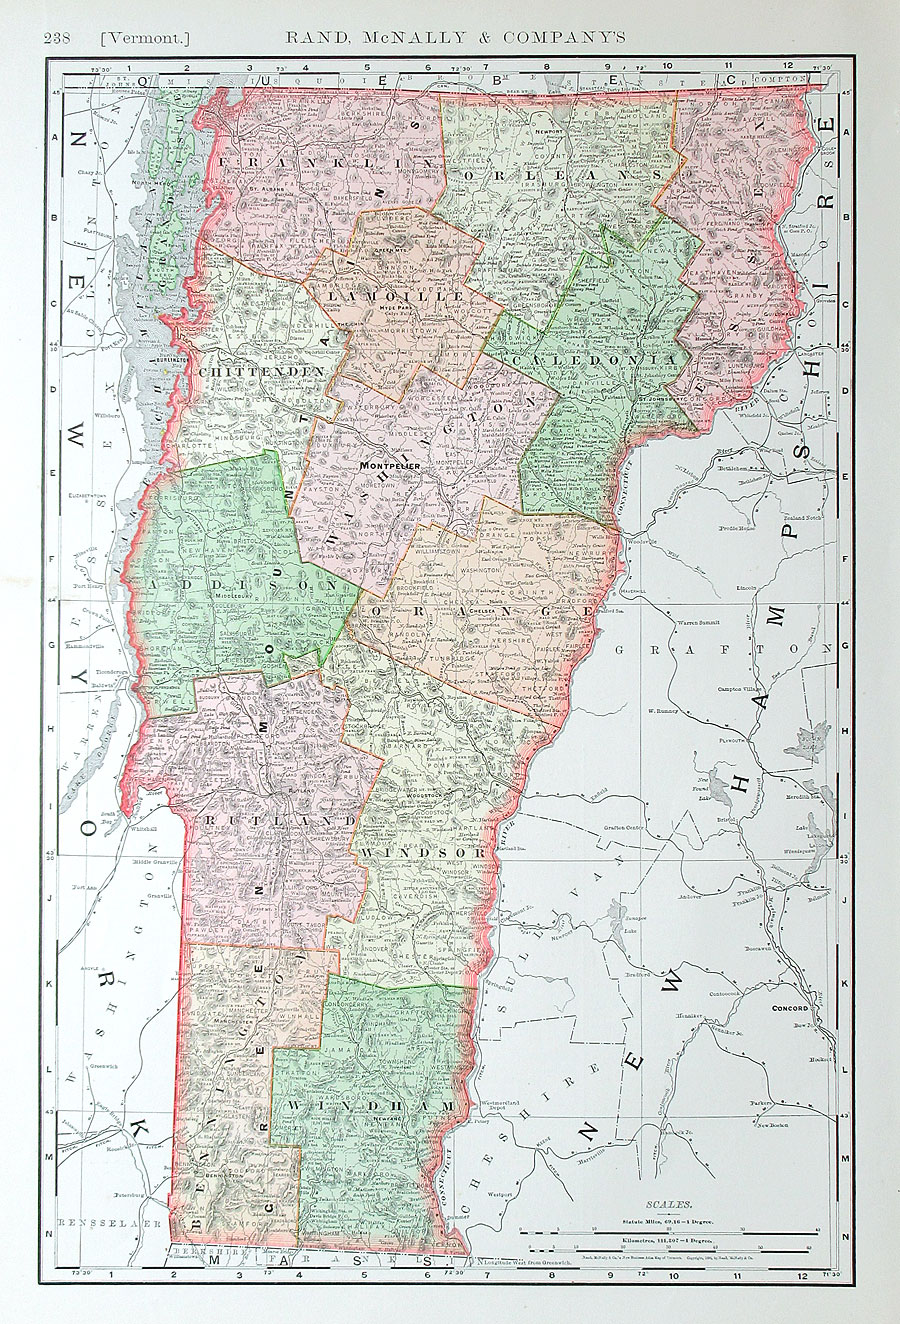 c 1894 Rand, McNally & Co Map of Vermont - large